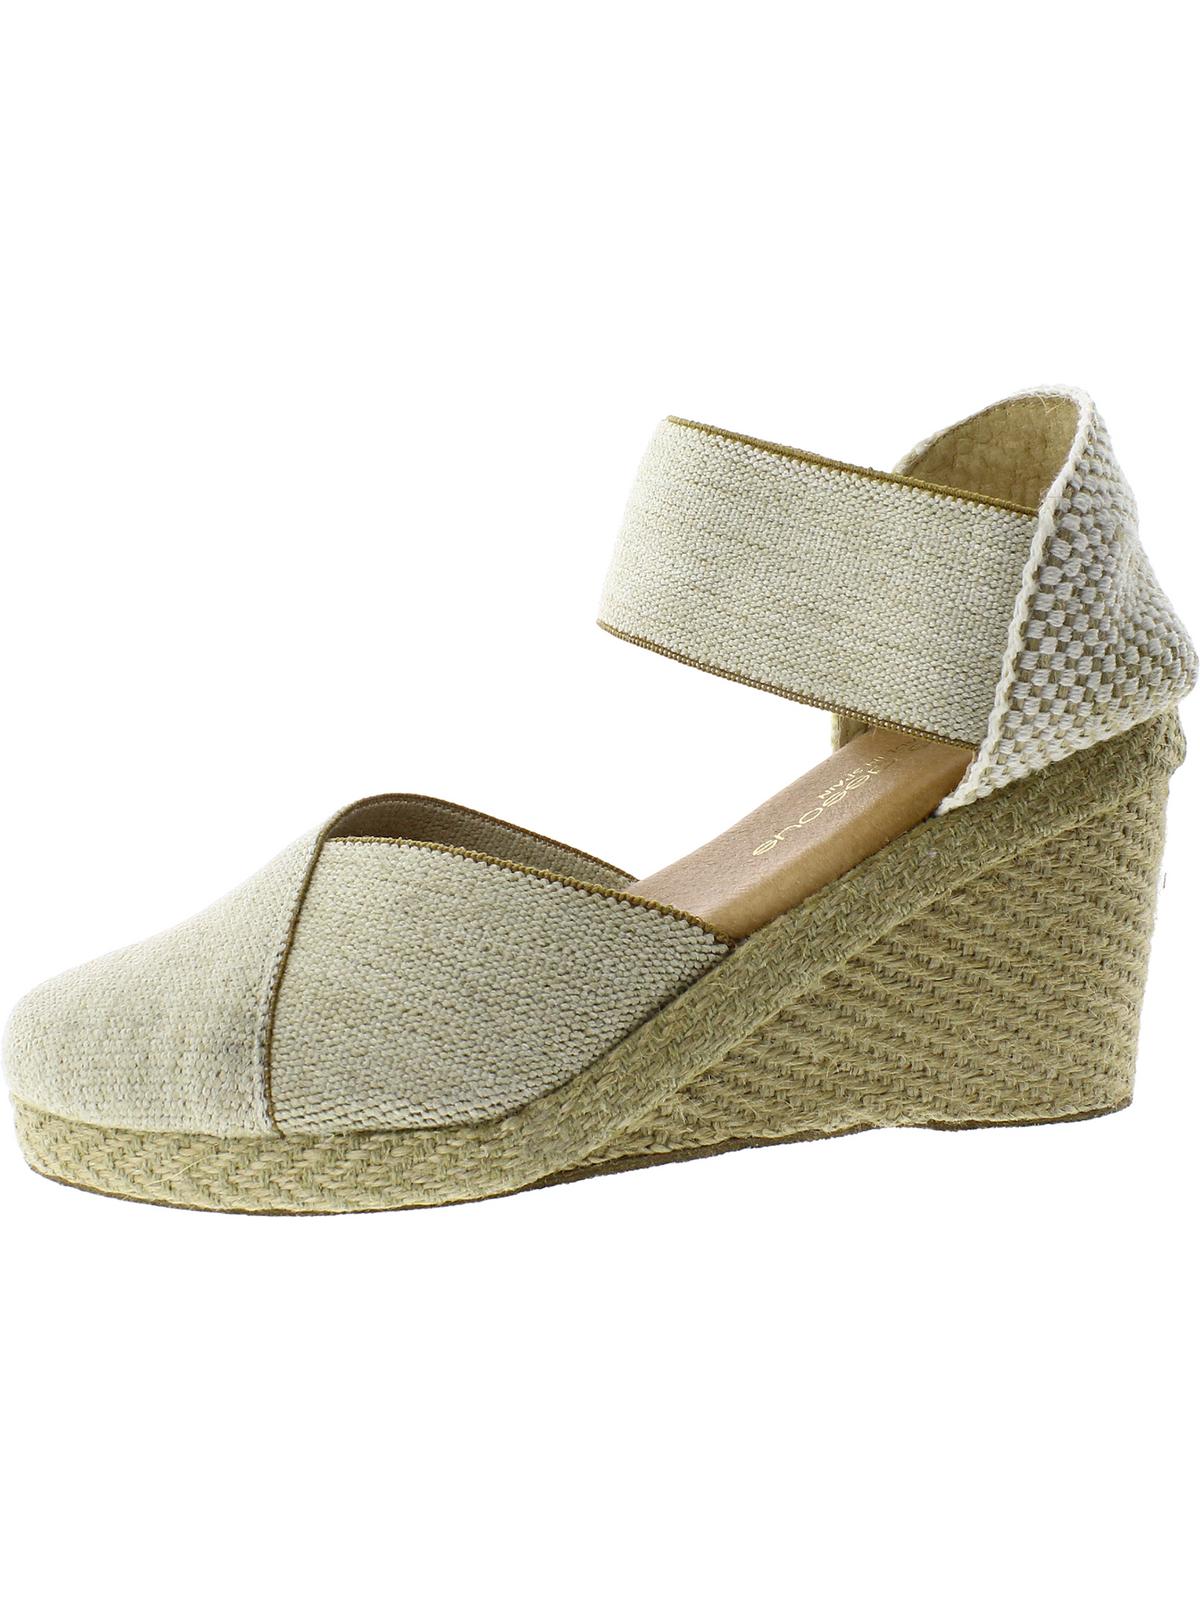 ANDRE ASSOUS Anouka  Womens Ankle Pull On Espadrilles